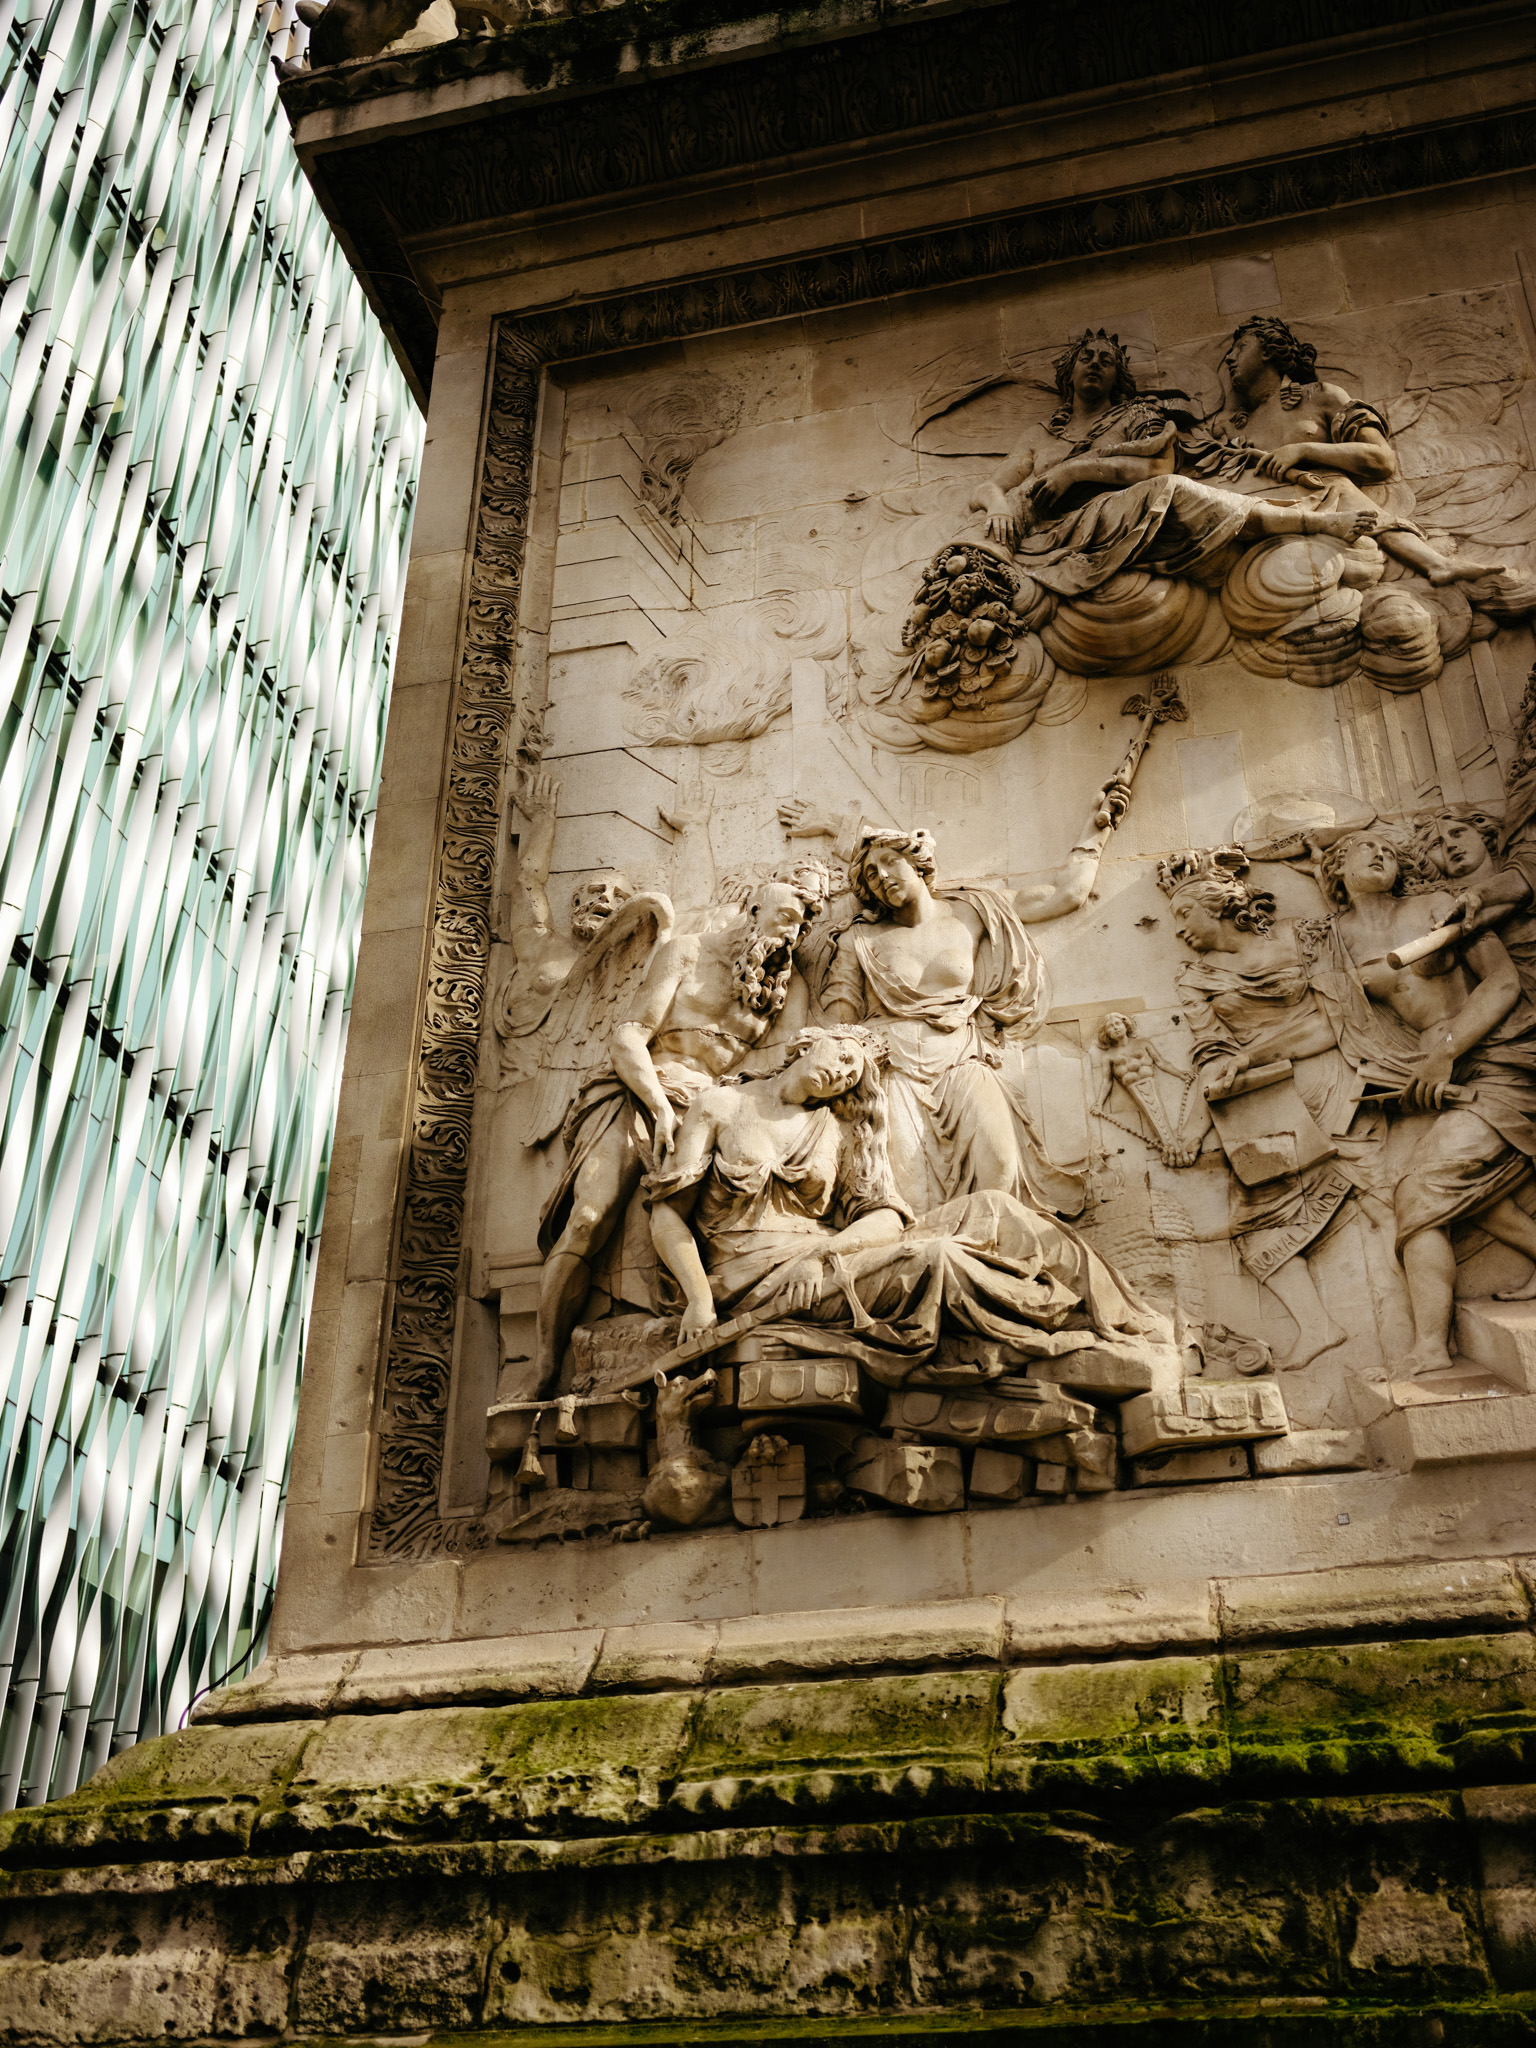 Attractions in the City of London - Monument - a fluted Doric column in London